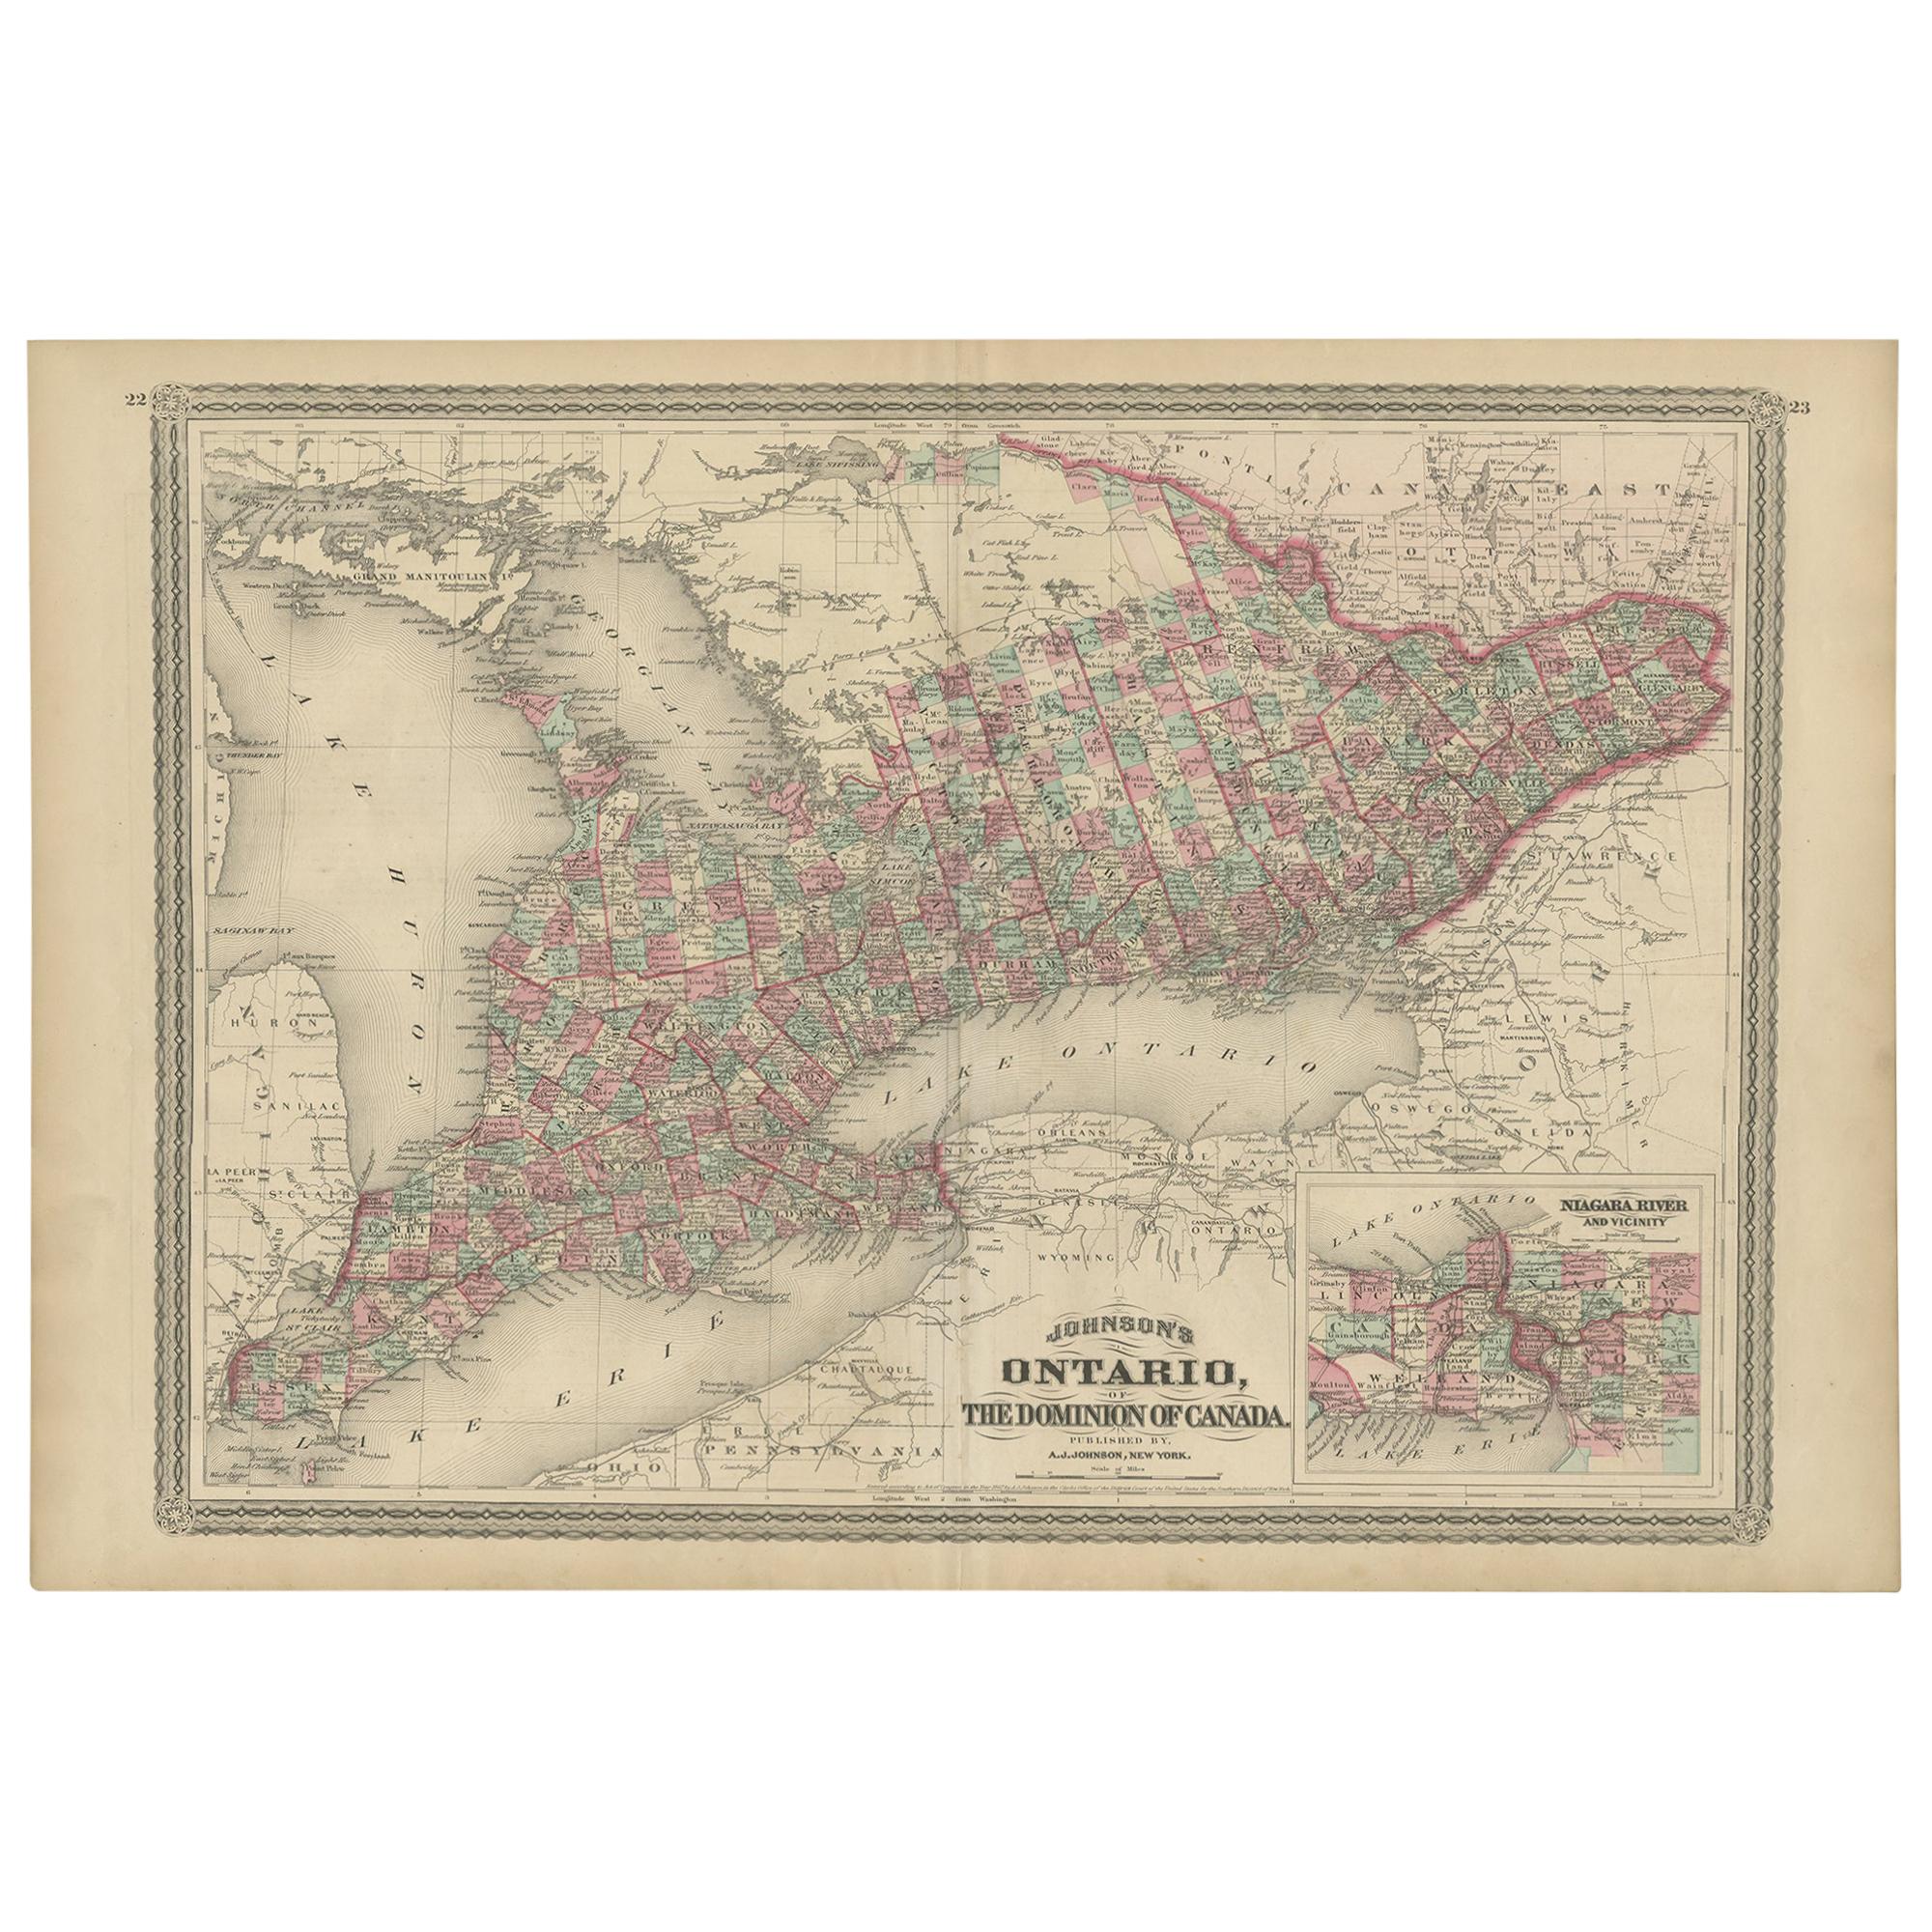 Antique Map of Ontario with an Inset Map of the Niagara River by Johnson, 1872